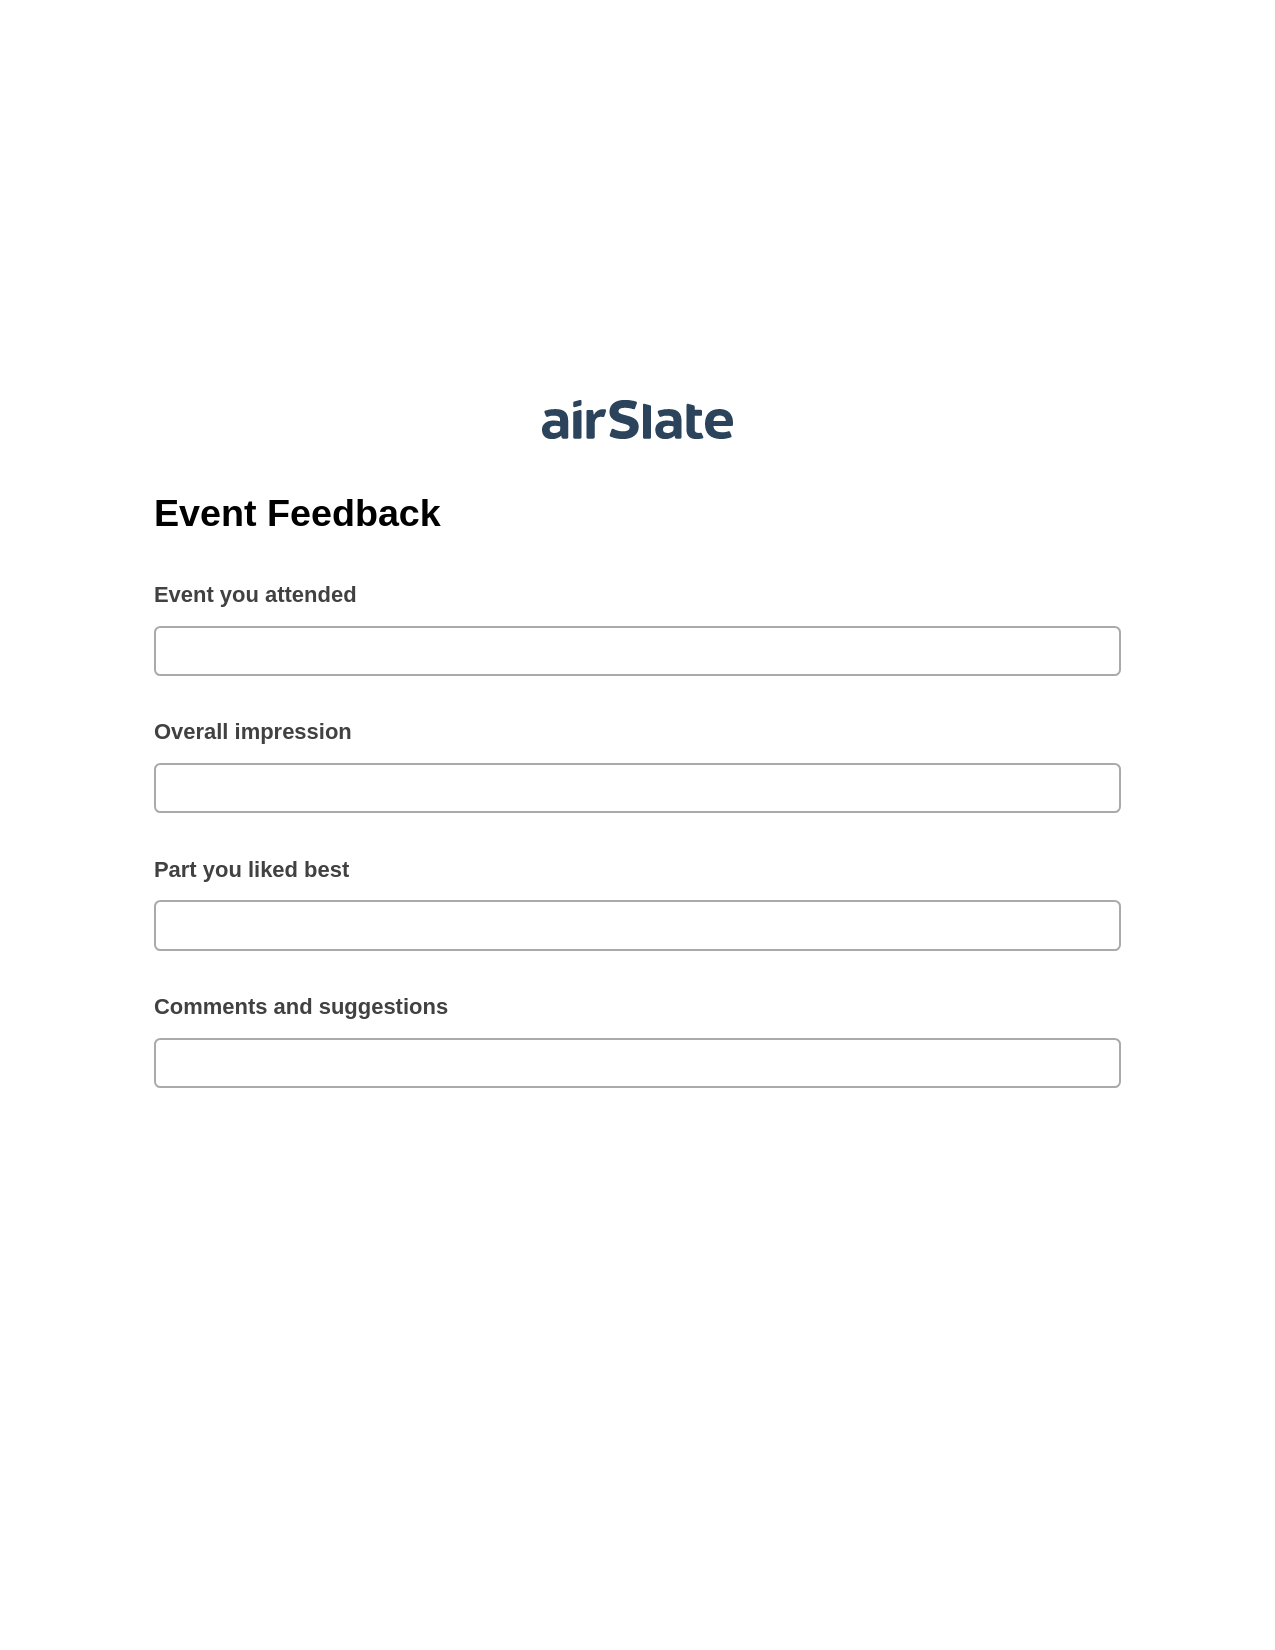 Event Feedback Pre-fill from Salesforce Record Bot, Update NetSuite Records Bot, Box Bot